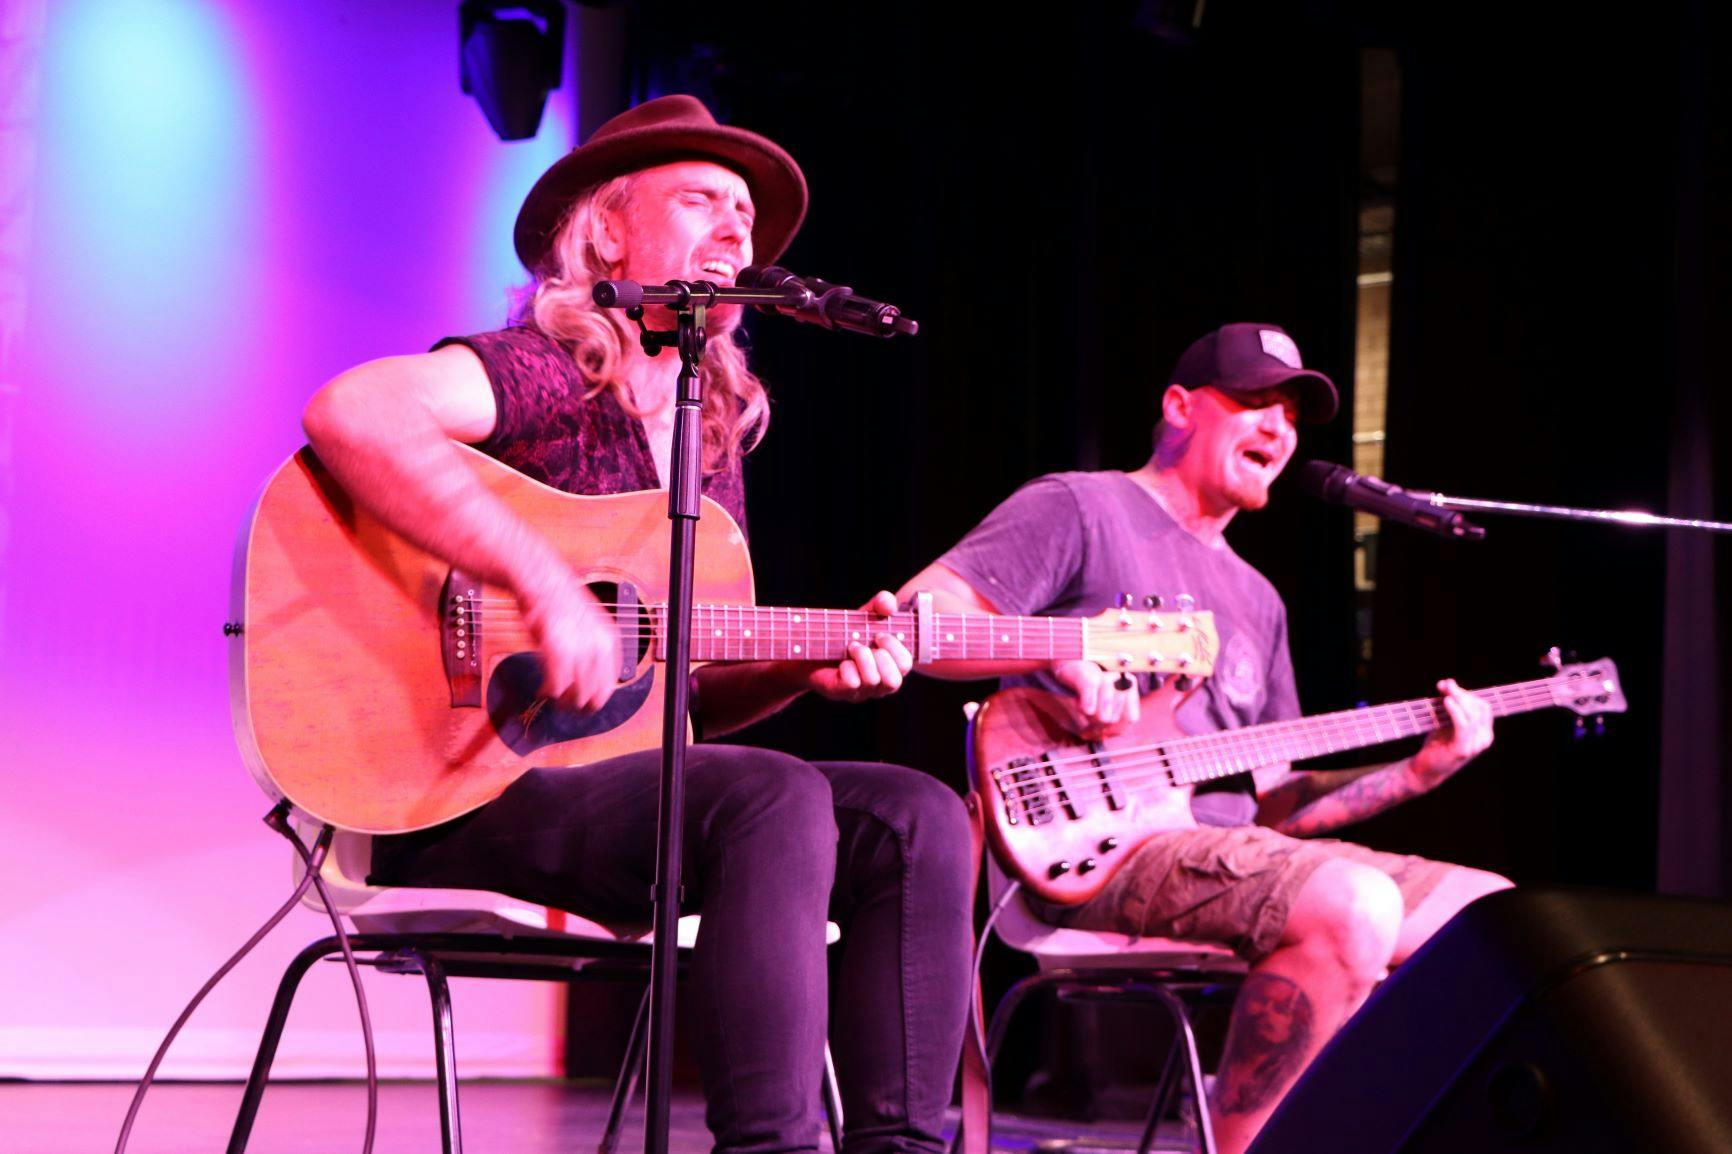 The Matty Rogers duo playing at Live and Local music forum in Murwillumbah in August 2022 (7).JPG